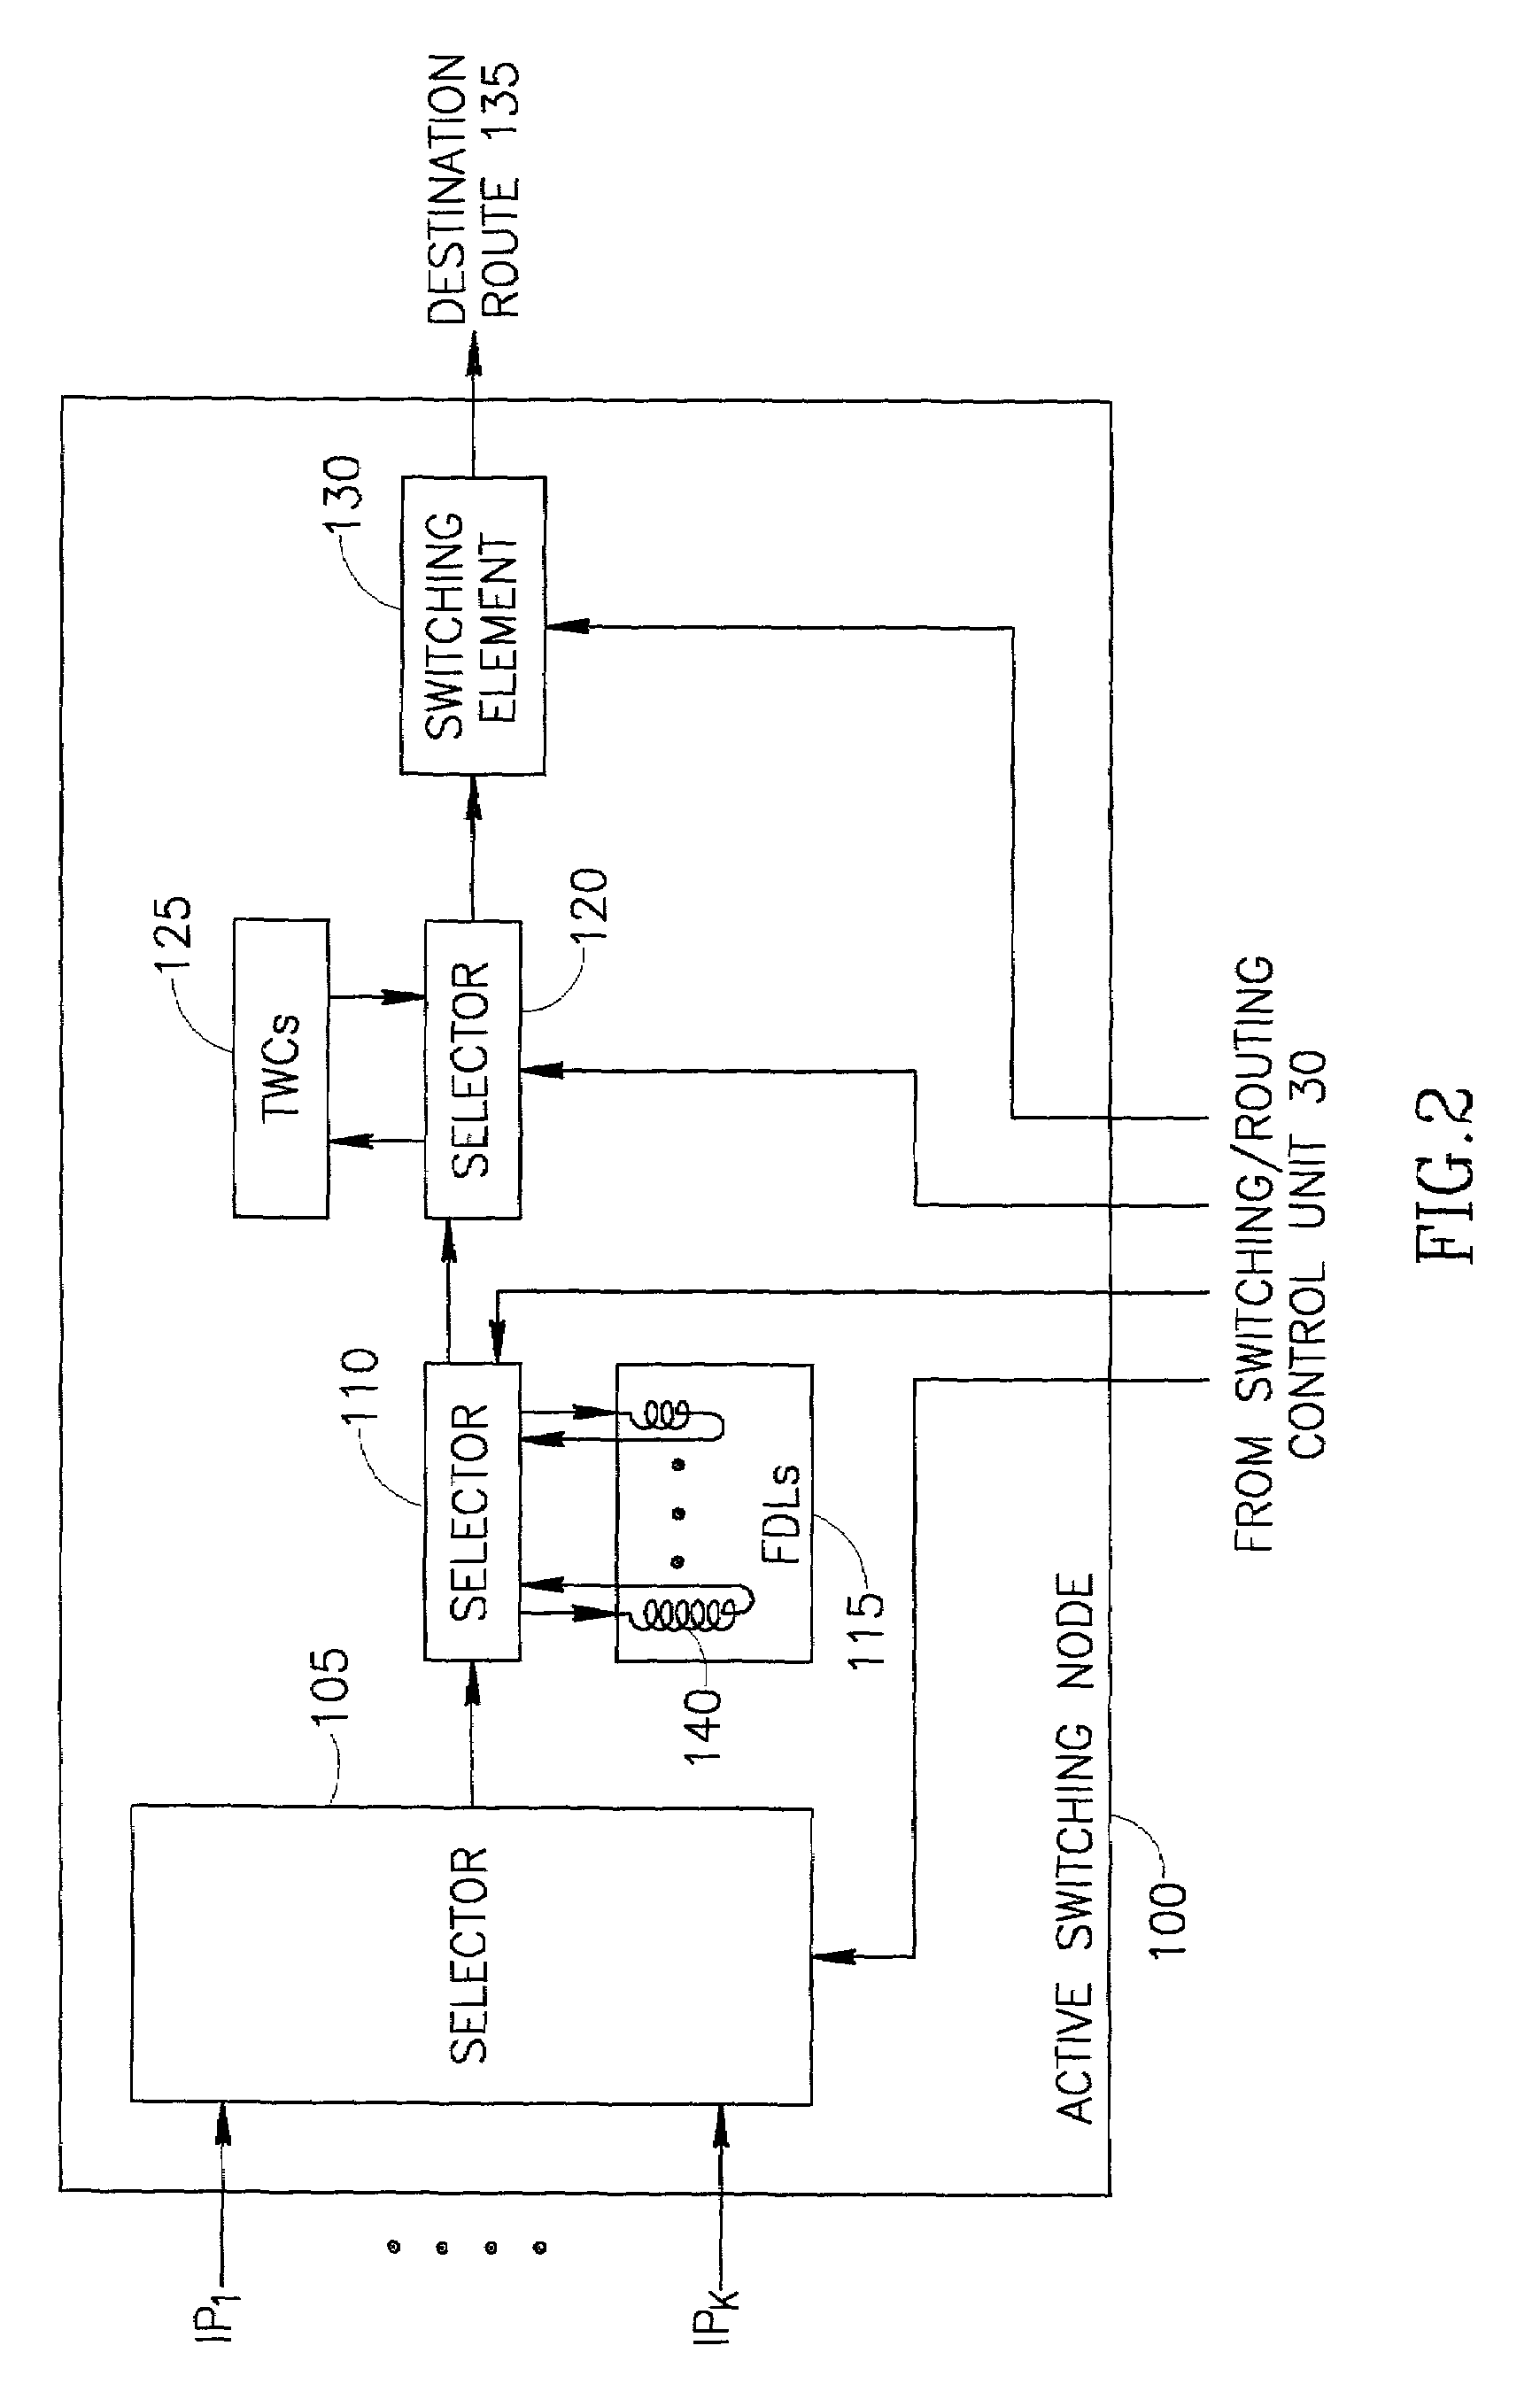 Optical packet switching apparatus and methods